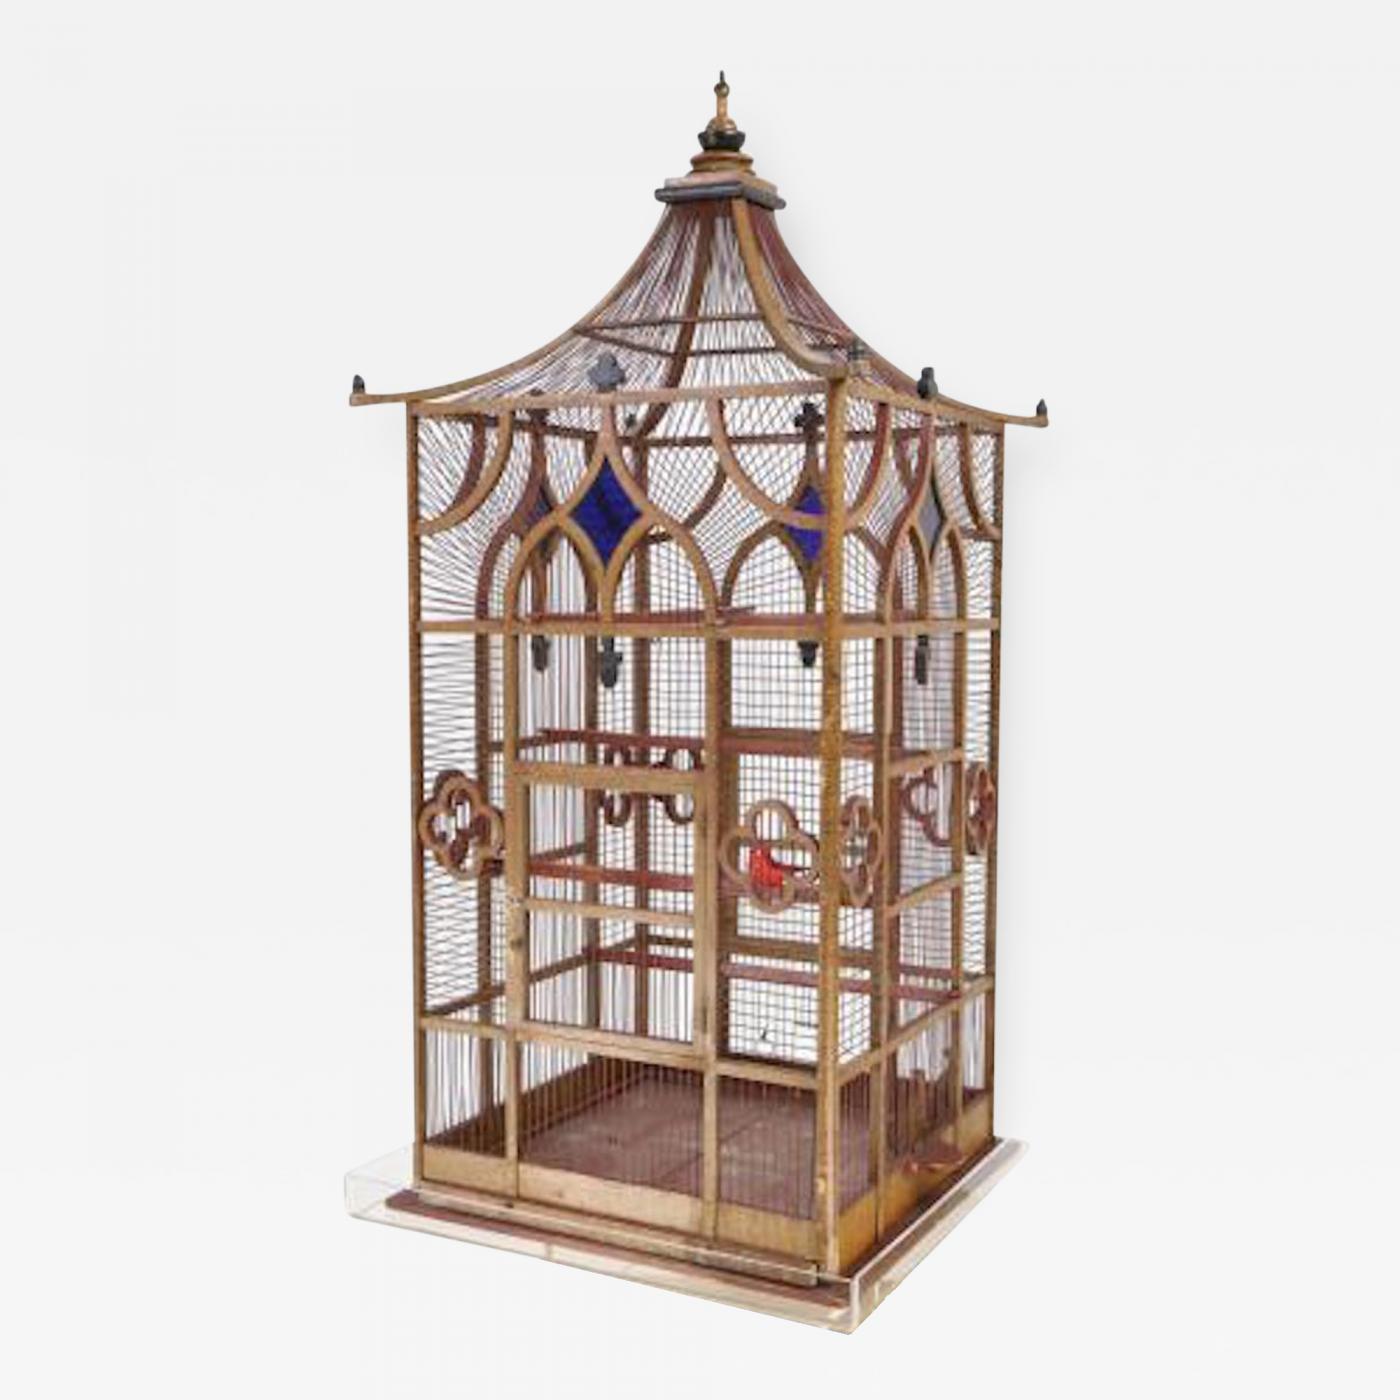 Grand Scaled Gothic Victorian Birdcage on Stand, England Circa 1870